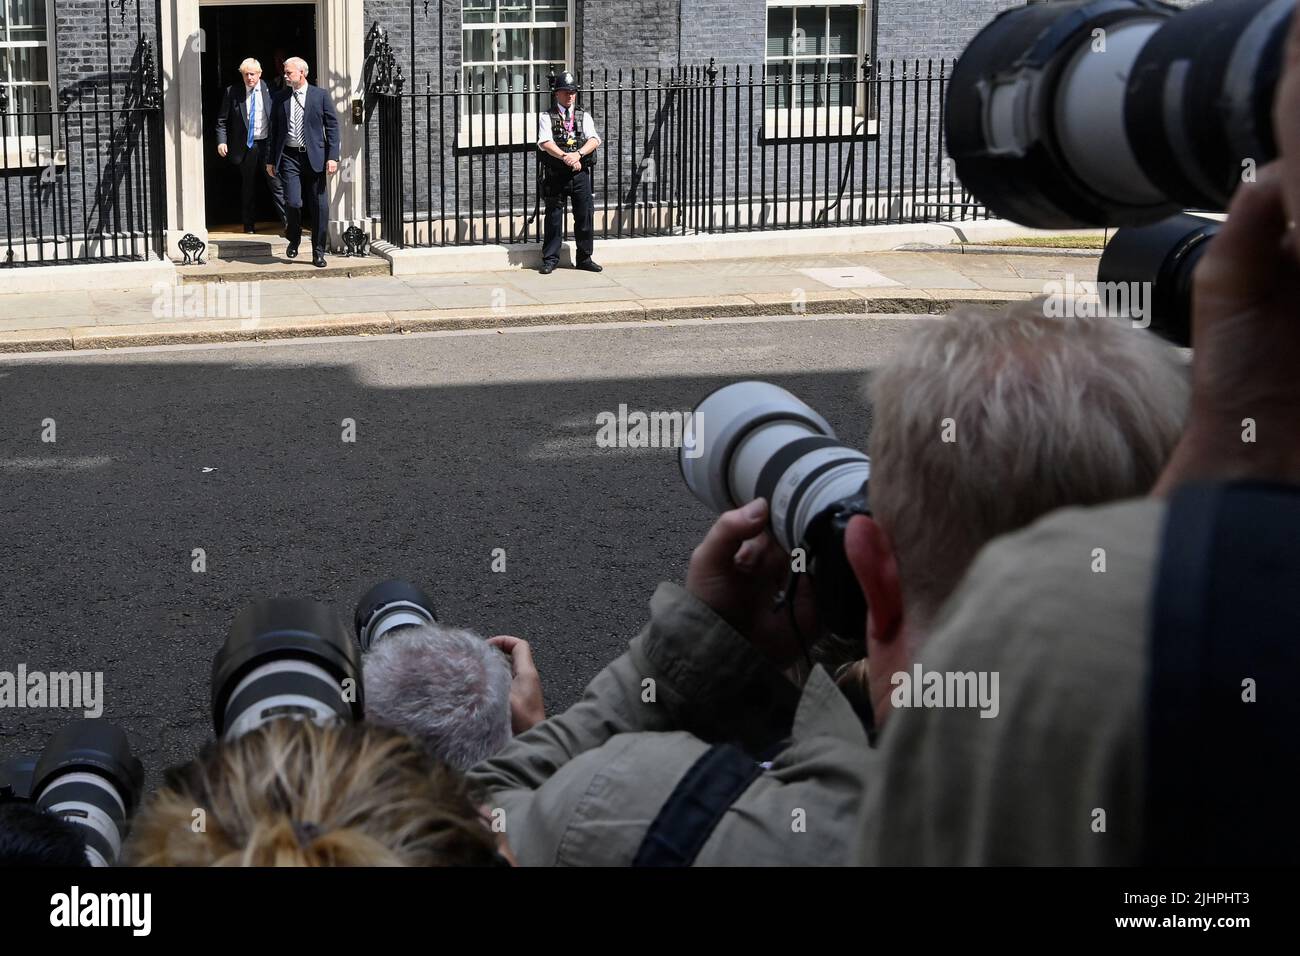 British Prime Minister Boris Johnson walks outside Downing Street in London, Britain, July 20, 2022. REUTERS/Toby Melville Stock Photo